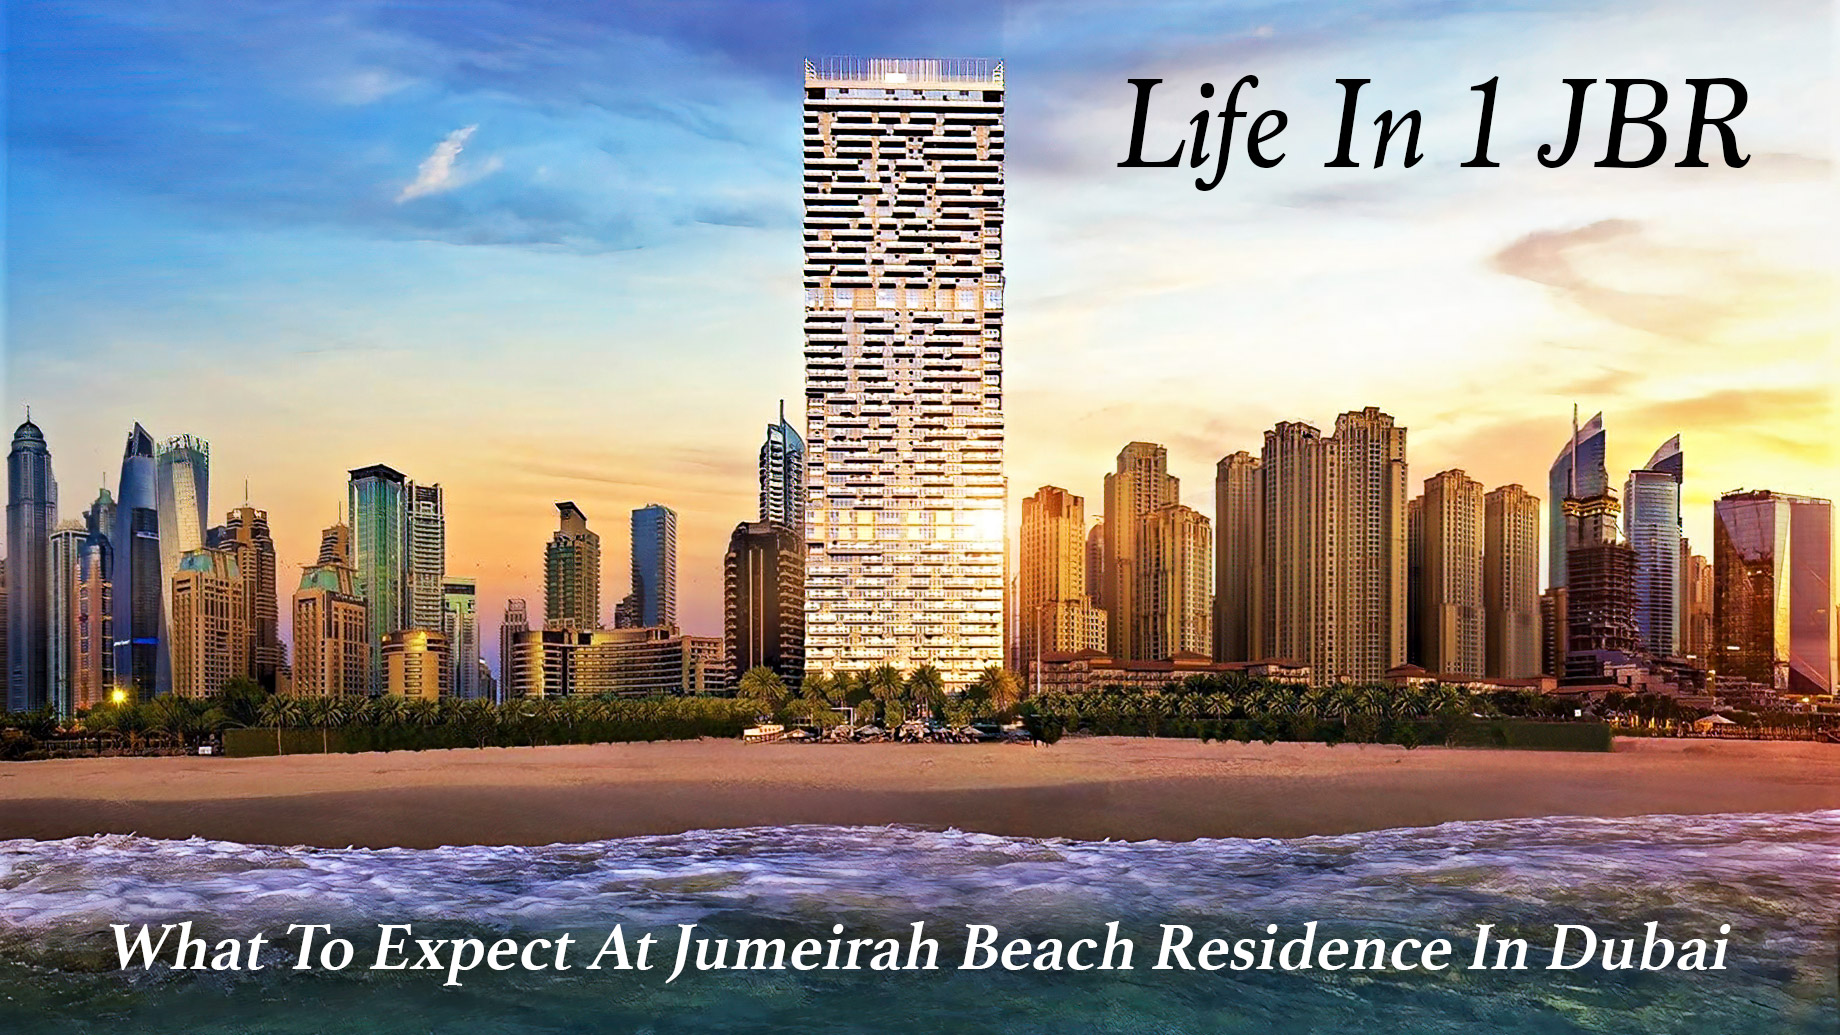 Life In 1 JBR – What To Expect At Jumeirah Beach Residence In Dubai